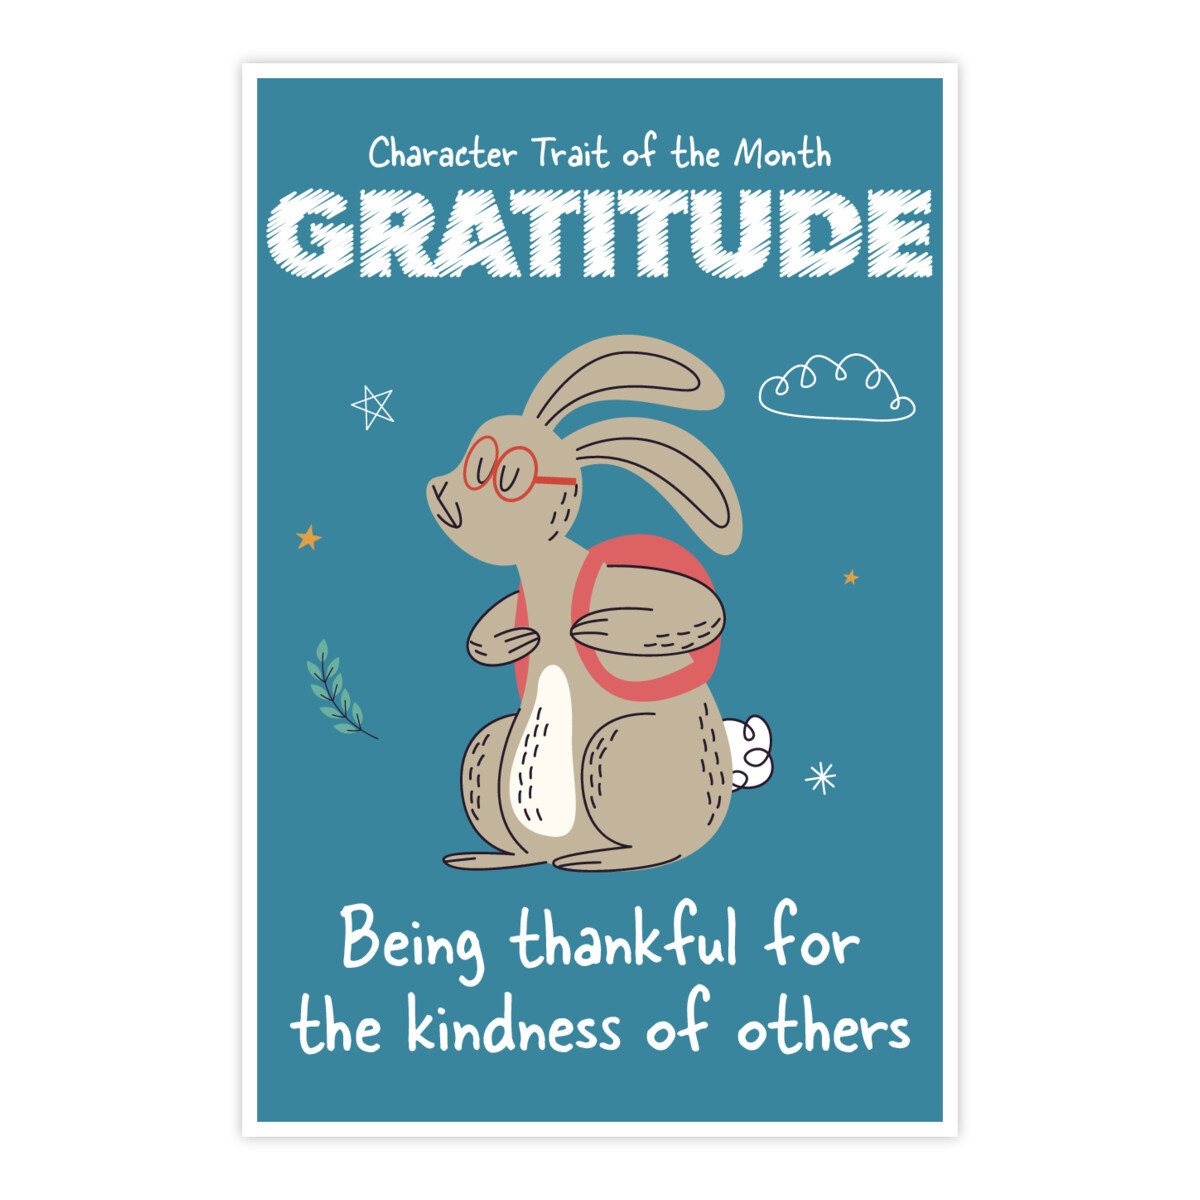 Character Trait of the Month Poster - Gratitude (Rabbit)